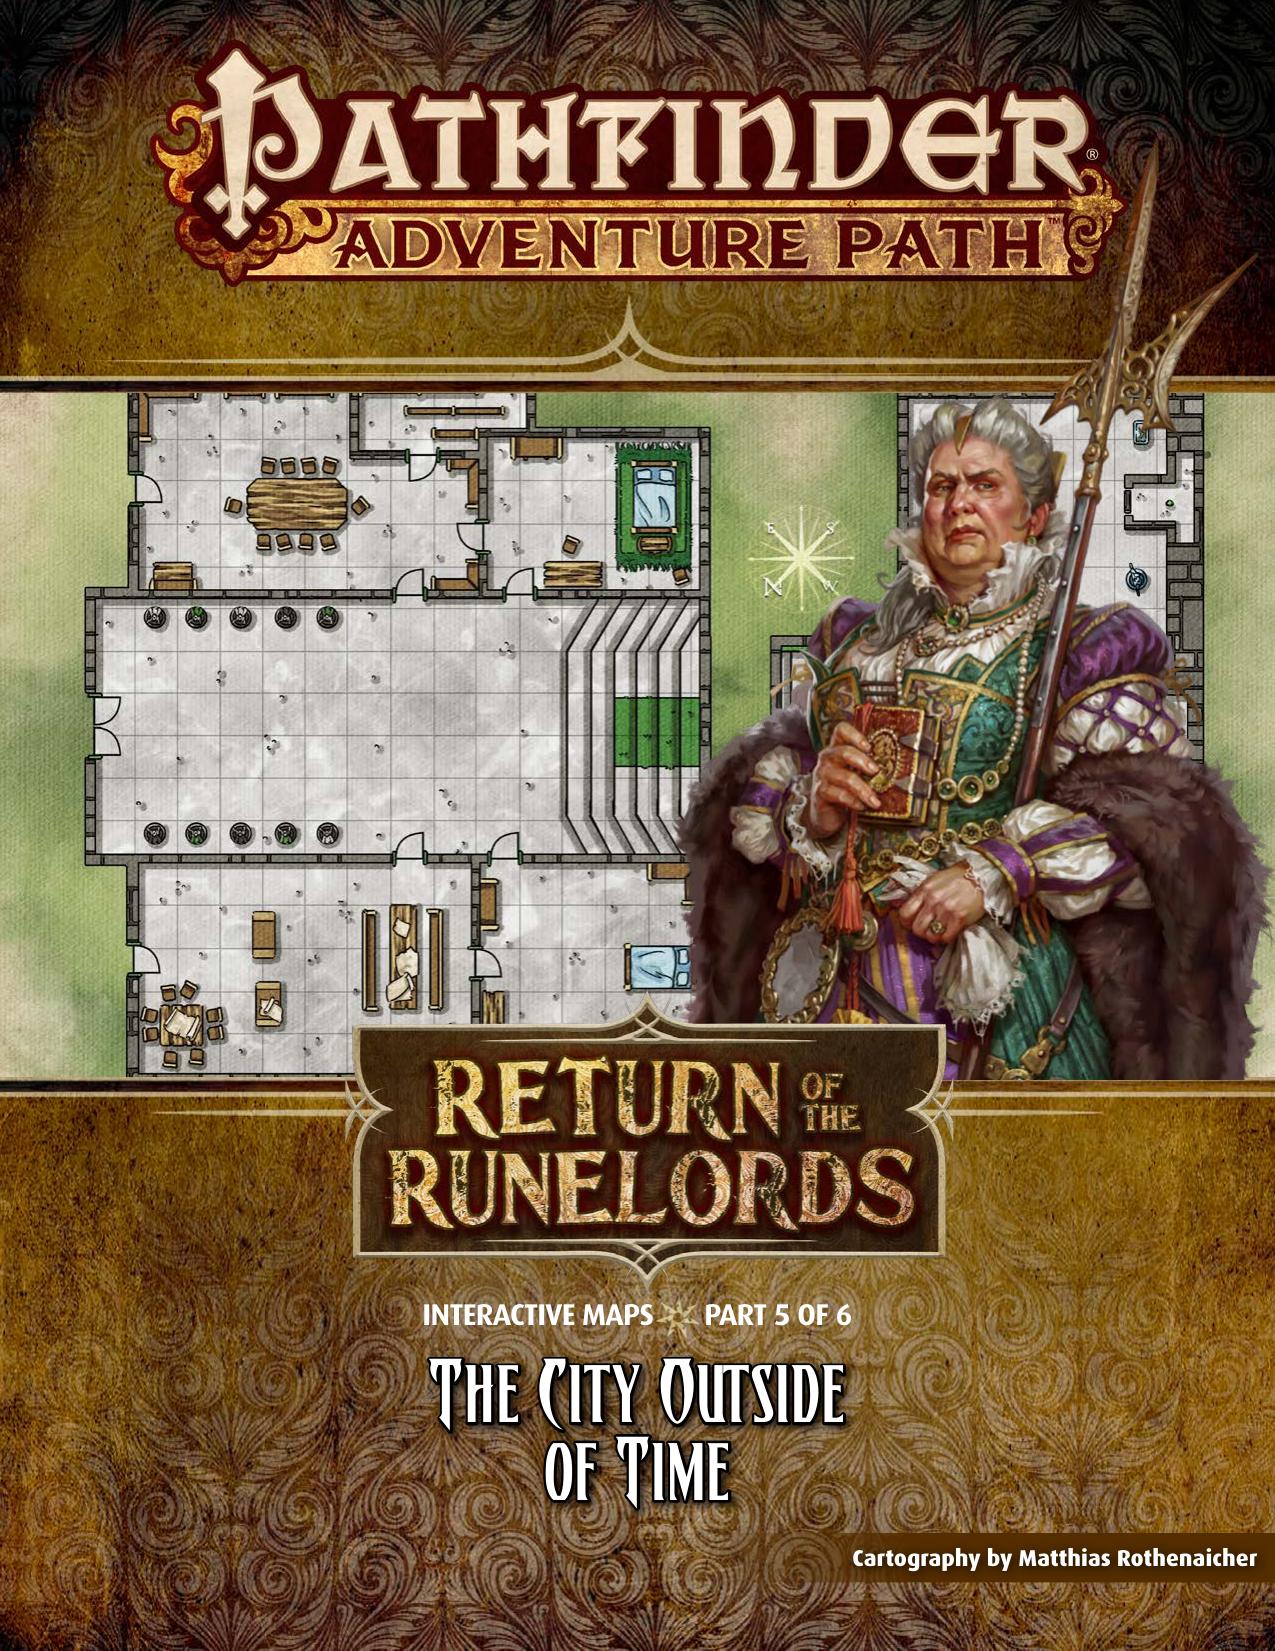 Return of the Runelords - 05 - The City Outside of Time by Interactive Maps